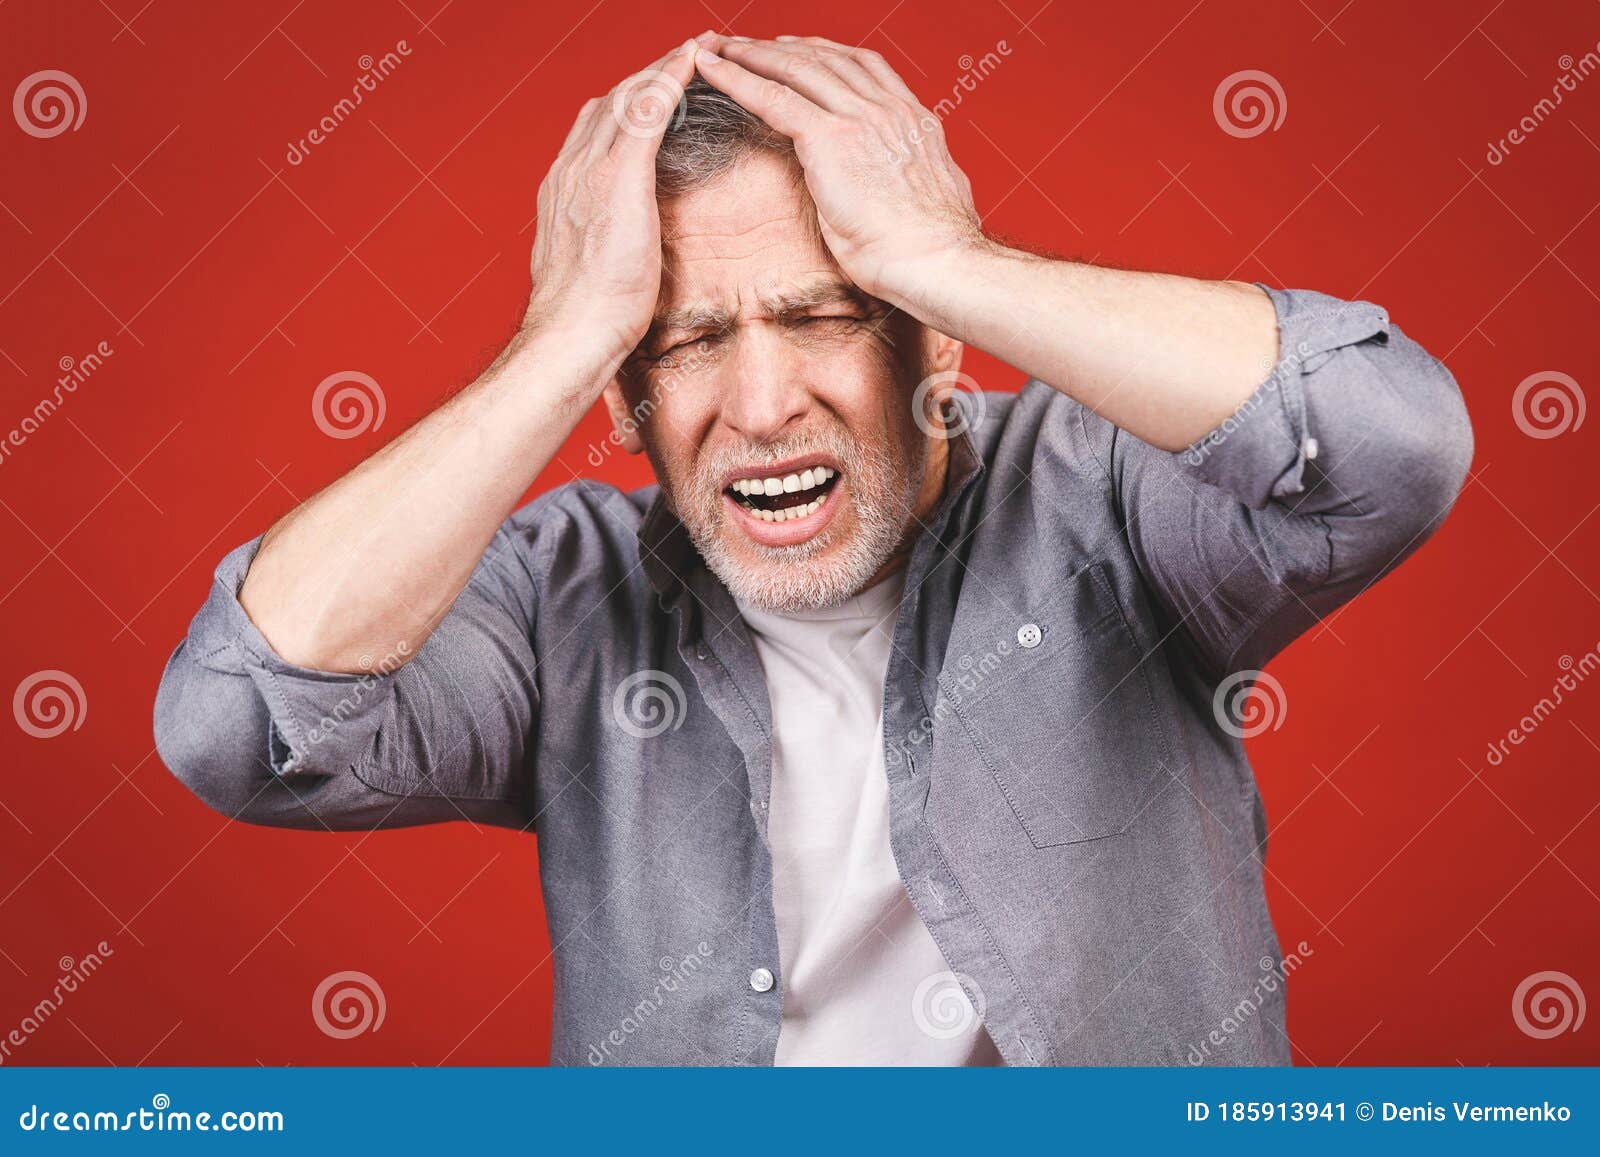 portrait of a groggy upset worried sad, depressed, tired senior man with a headache, very stressed,  on red background,